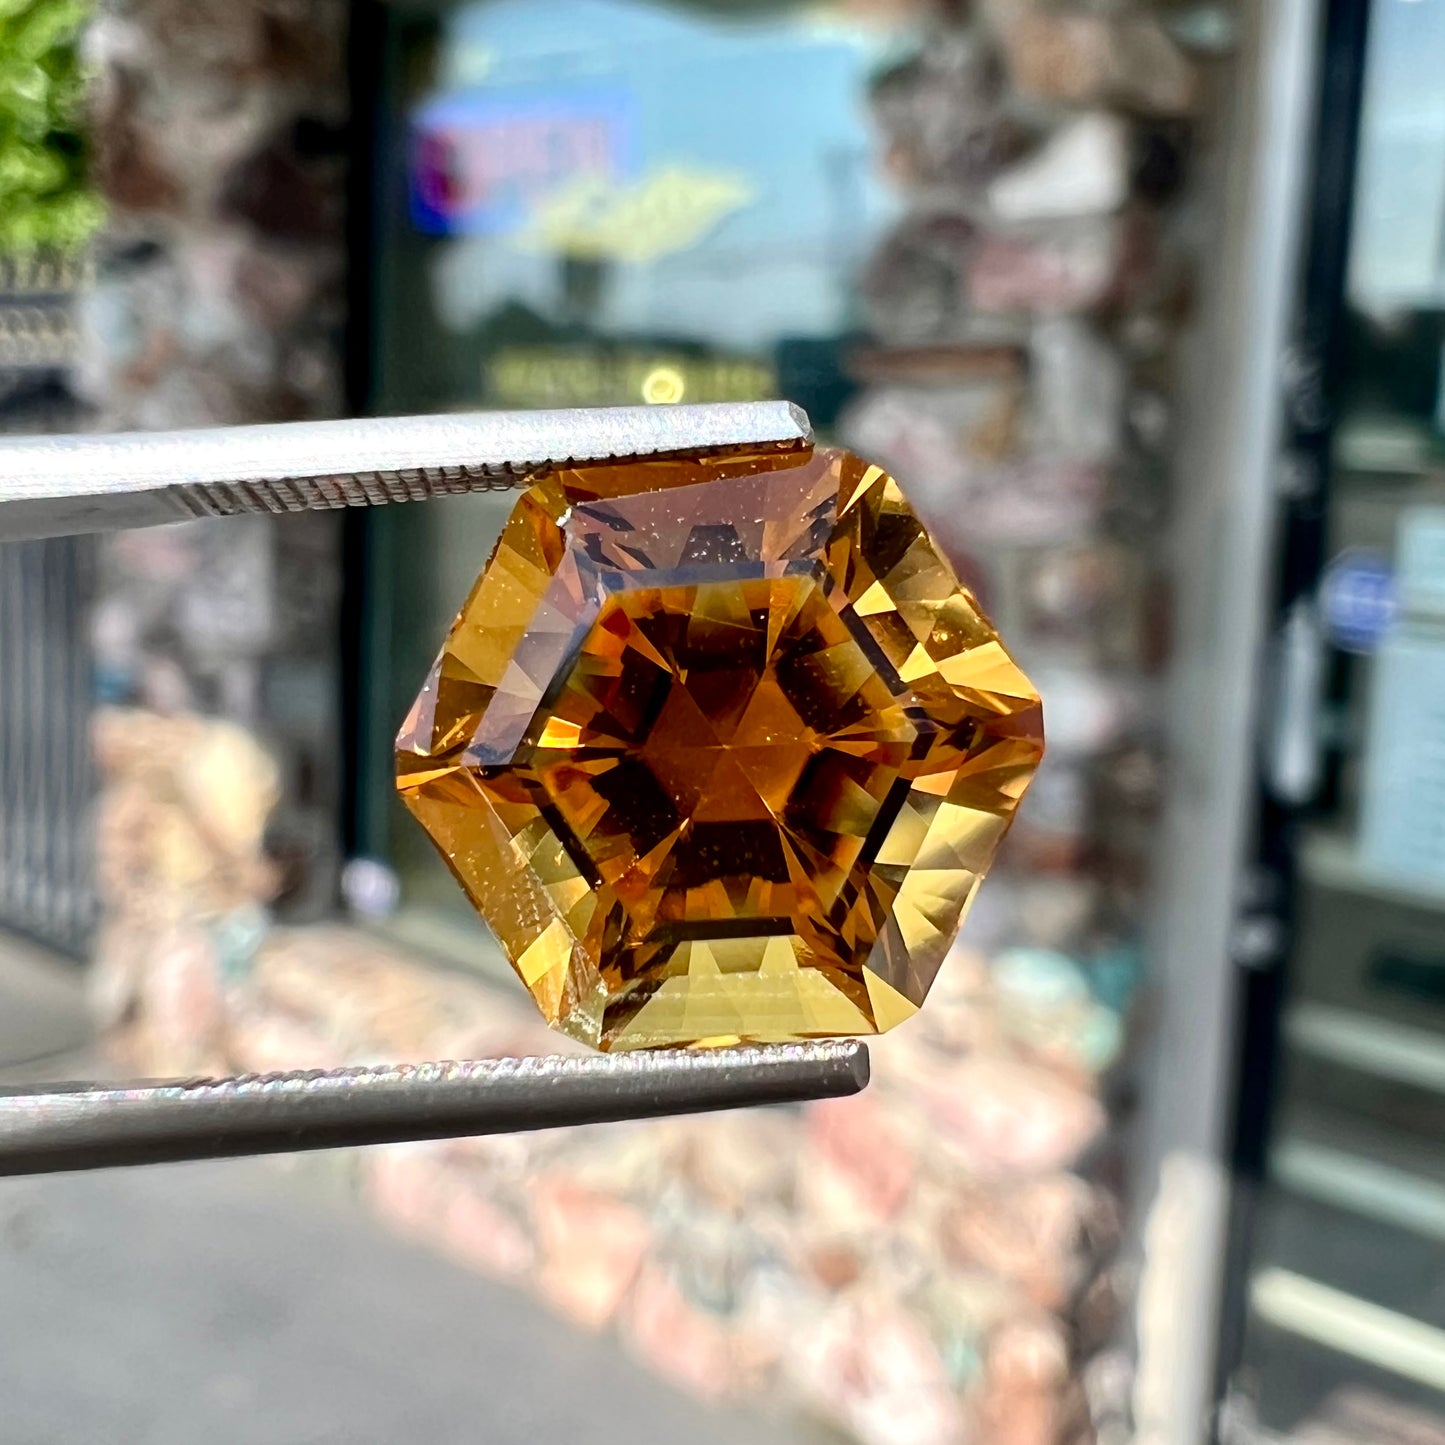 A loose, faceted hexagon cut citrine gem.  The stone is golden yellow color.